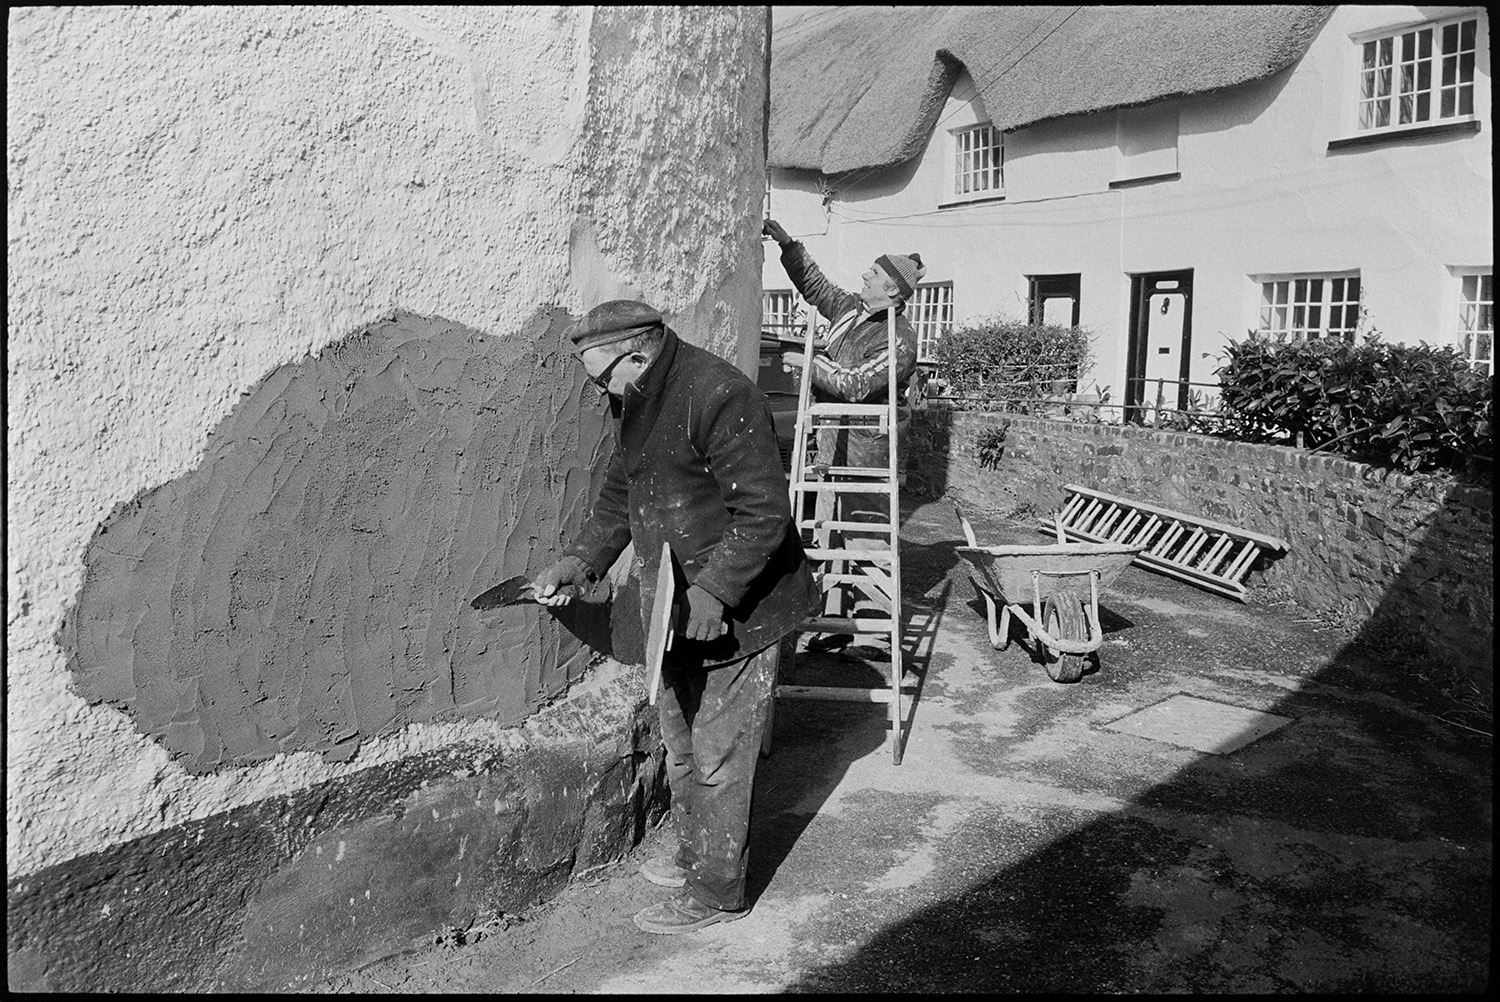 Derek Marden and Clifford Palmer repairing the cob wall of a house in North Street, Dolton. Ladders and wheelbarrow are in the street next to them.